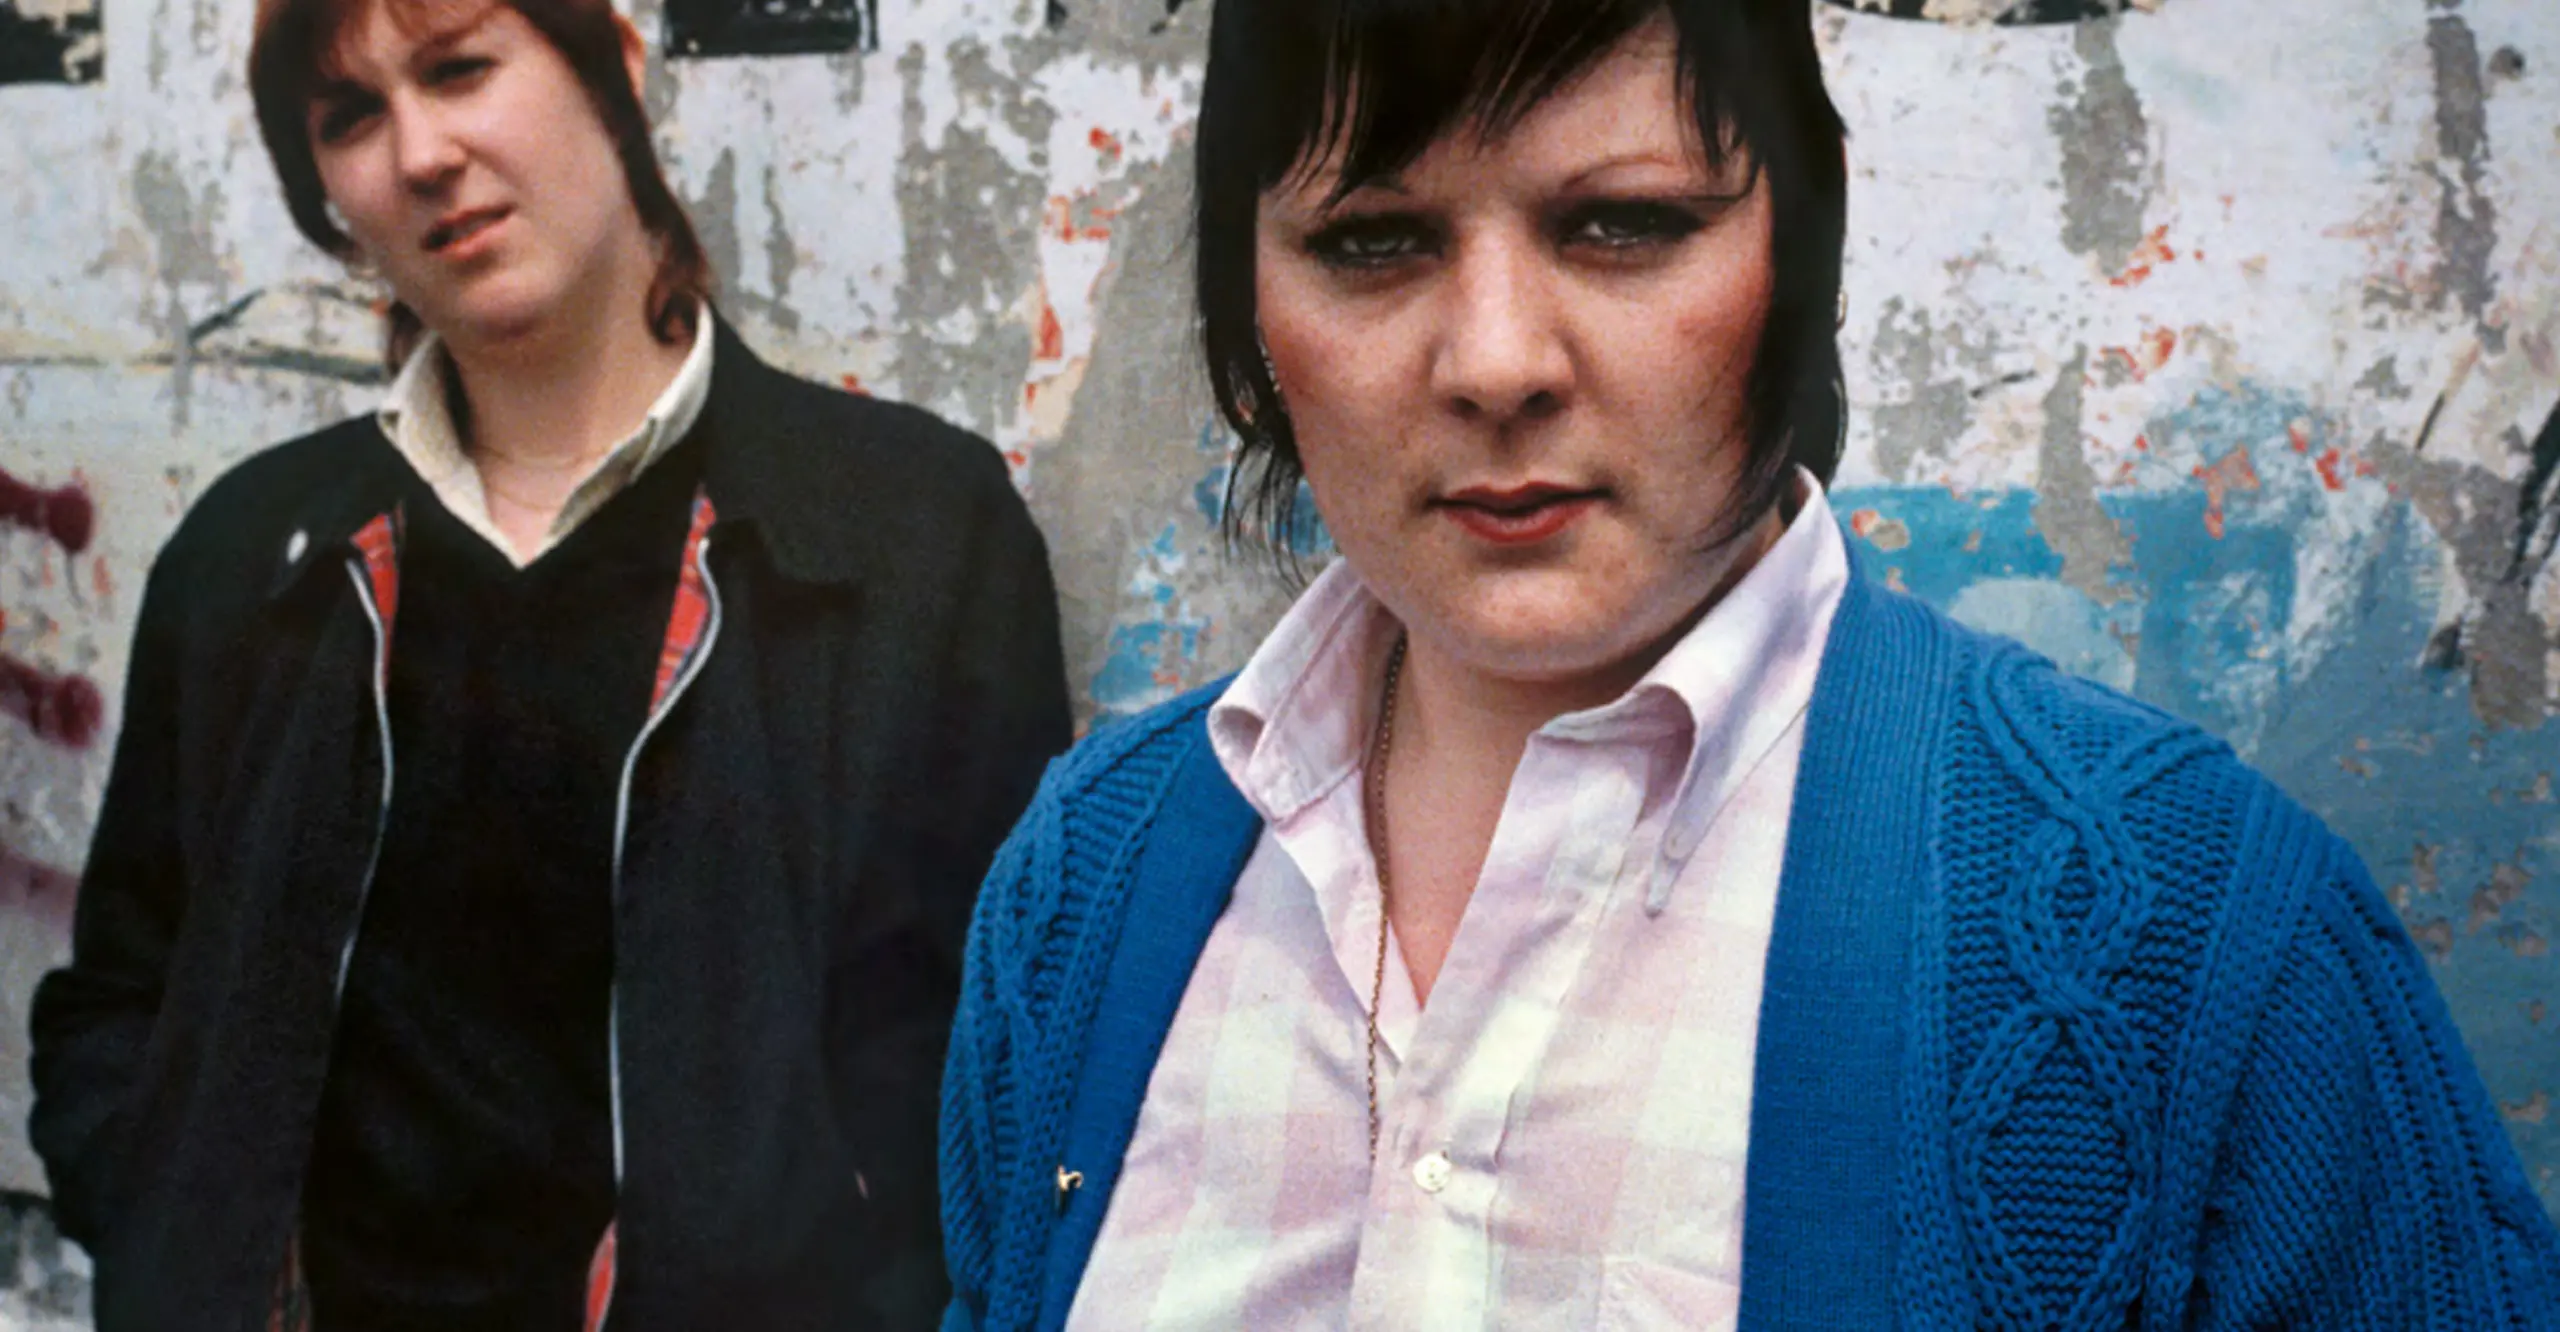 Derek Ridgers' portrait of two young people in front of a wall